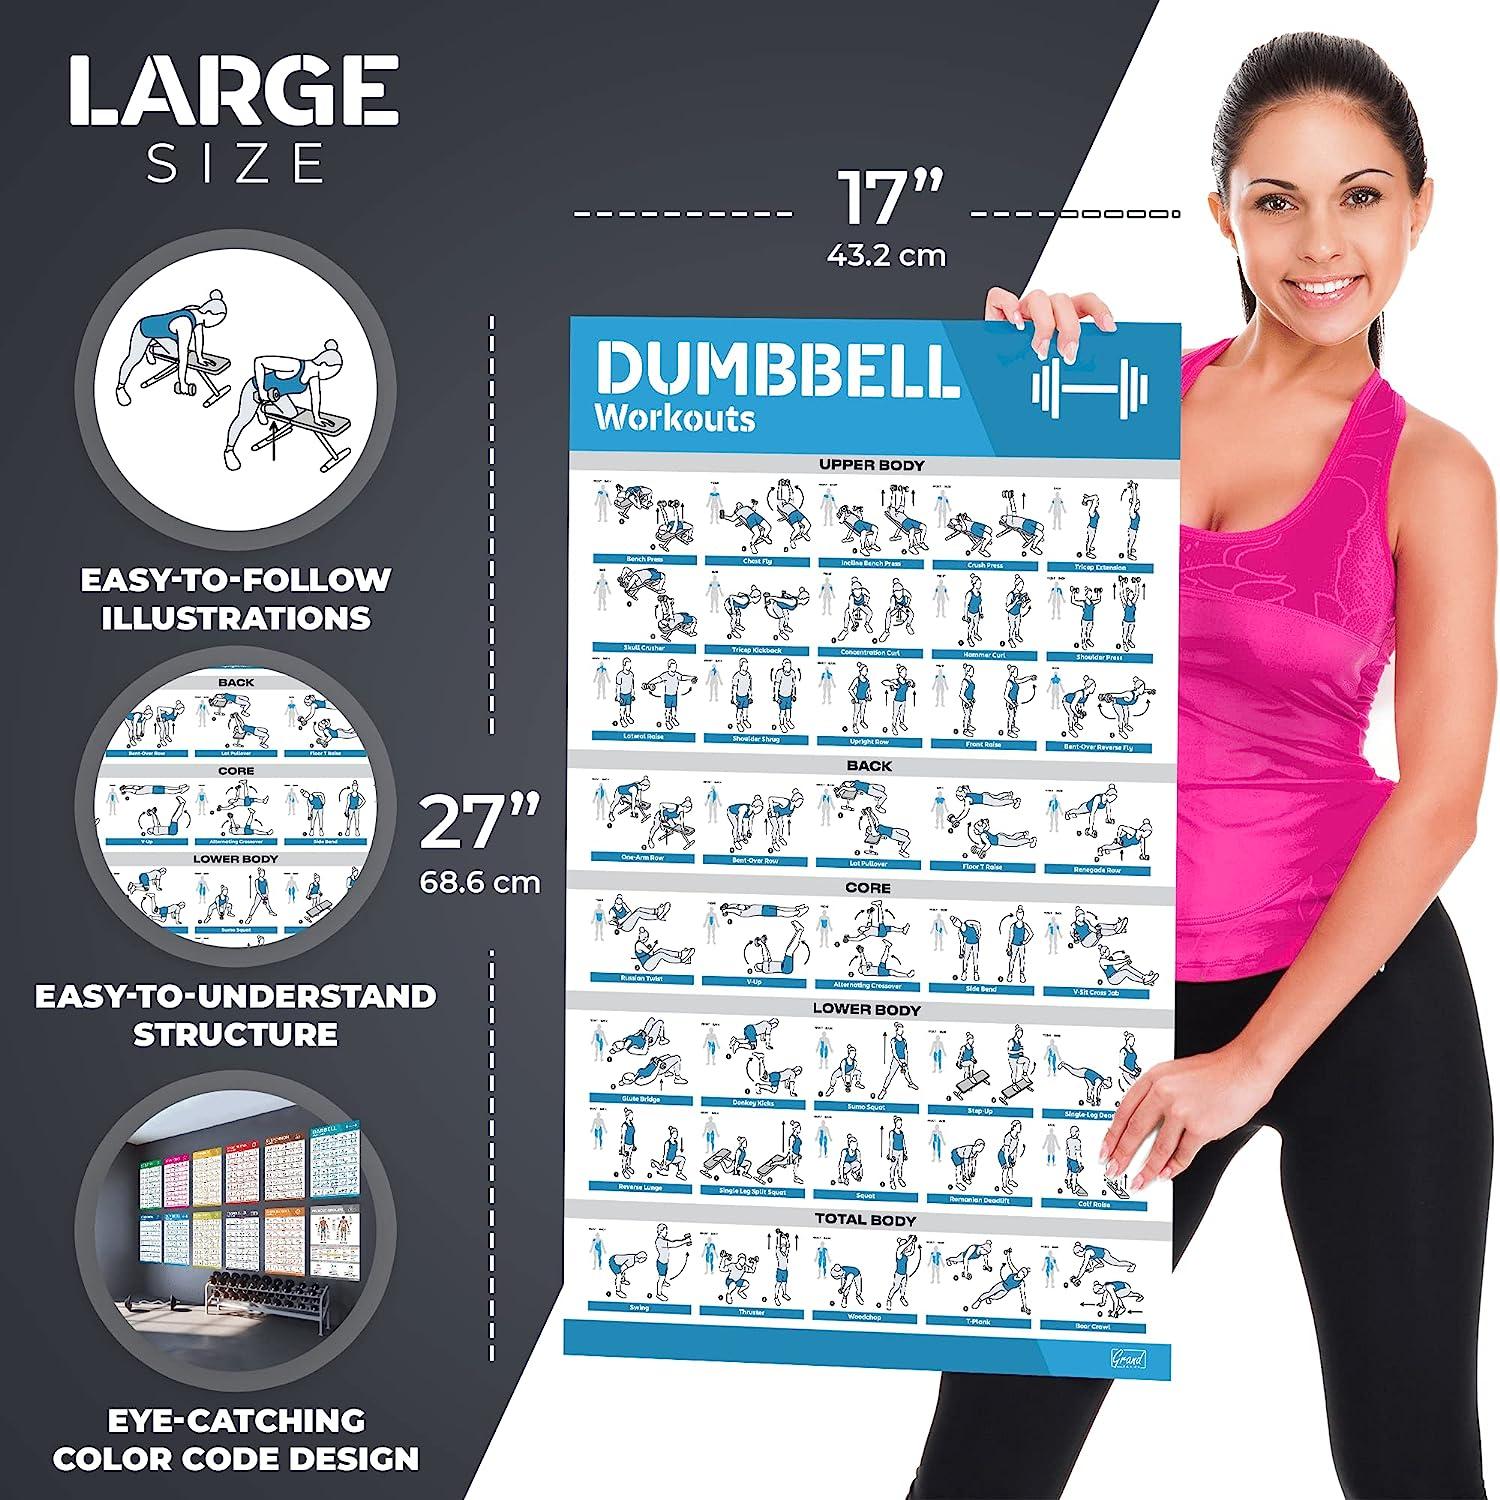 16-PACK Laminated Large Workout Poster Set - Perfect Workout